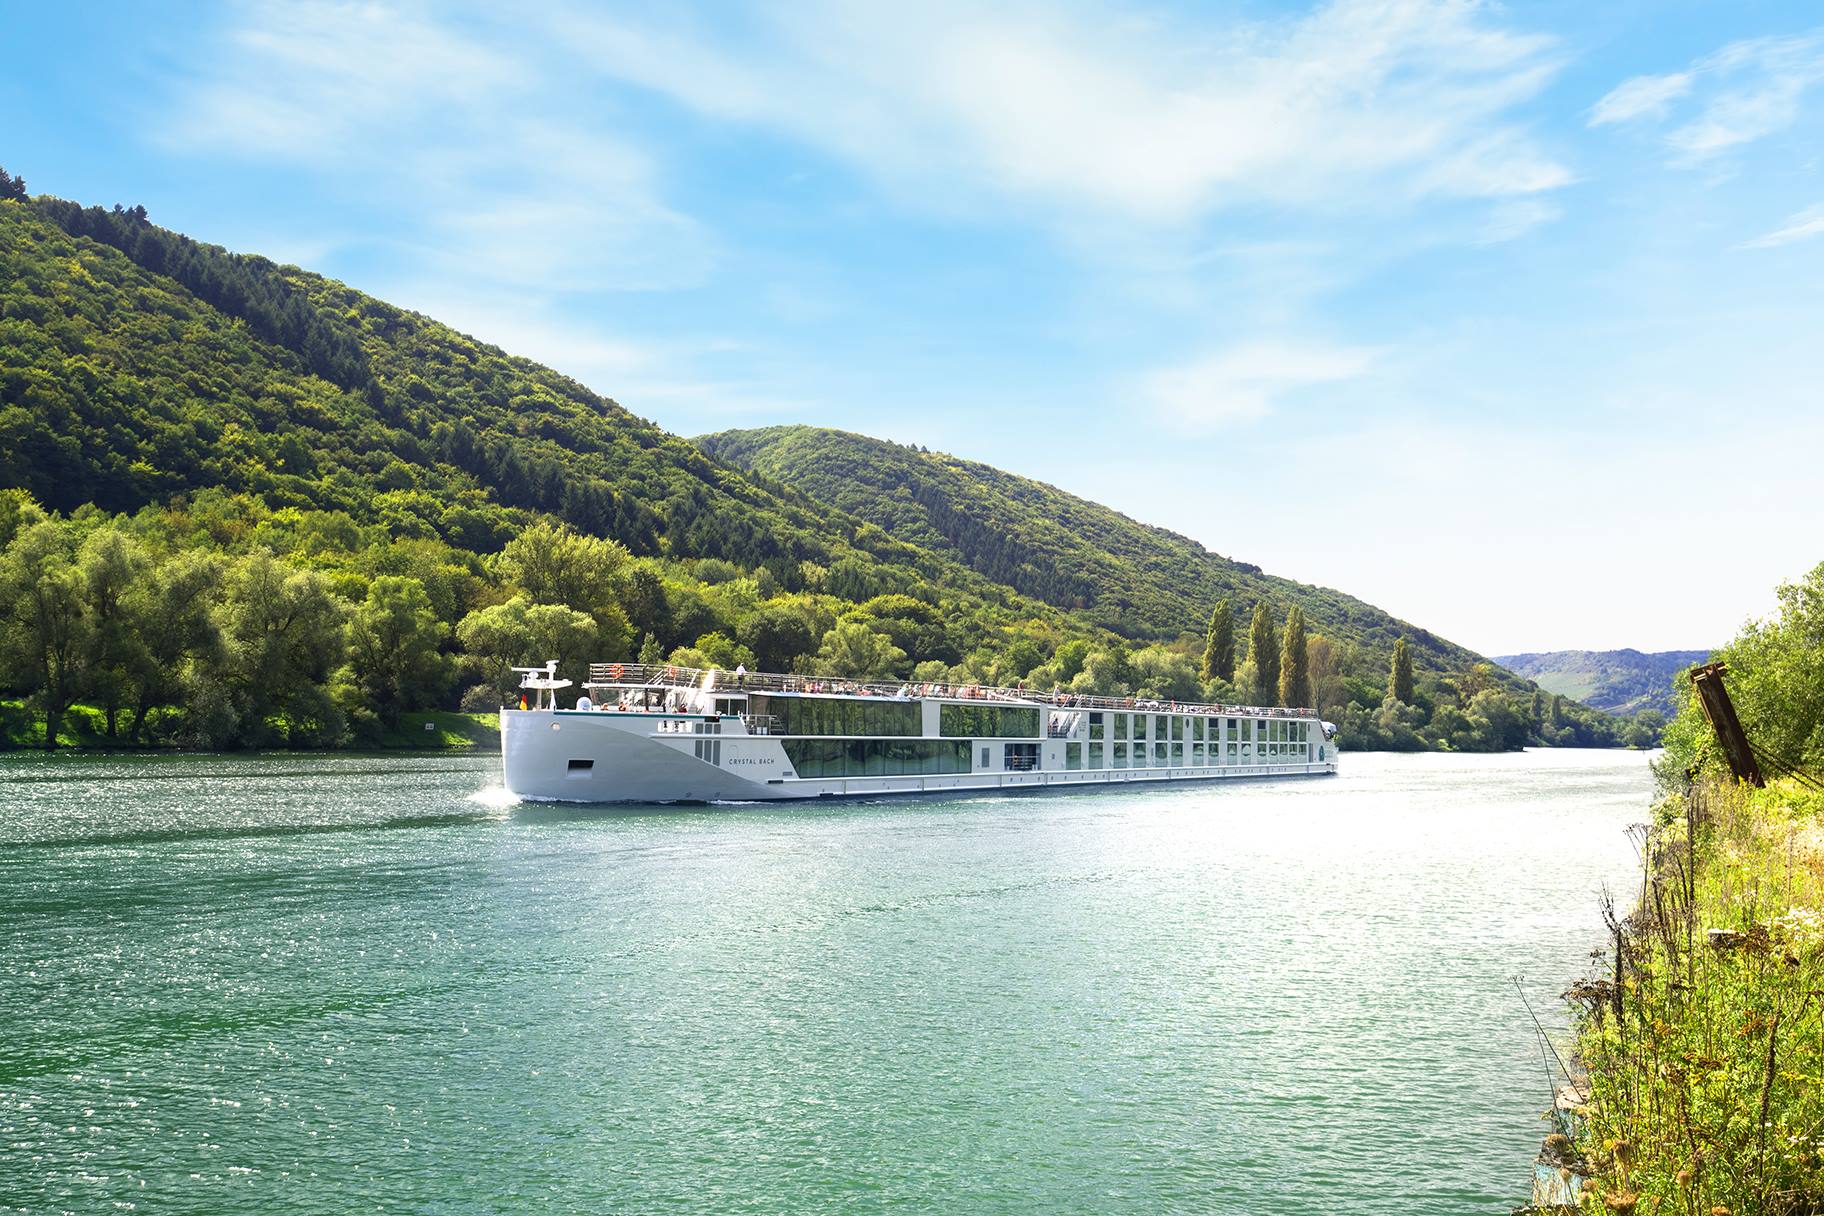 Crystal River Cruises has expanded its 2022 offerings with the reintroduction of Crystal Mozart, the company’s grand, double-wide inaugural river ship.